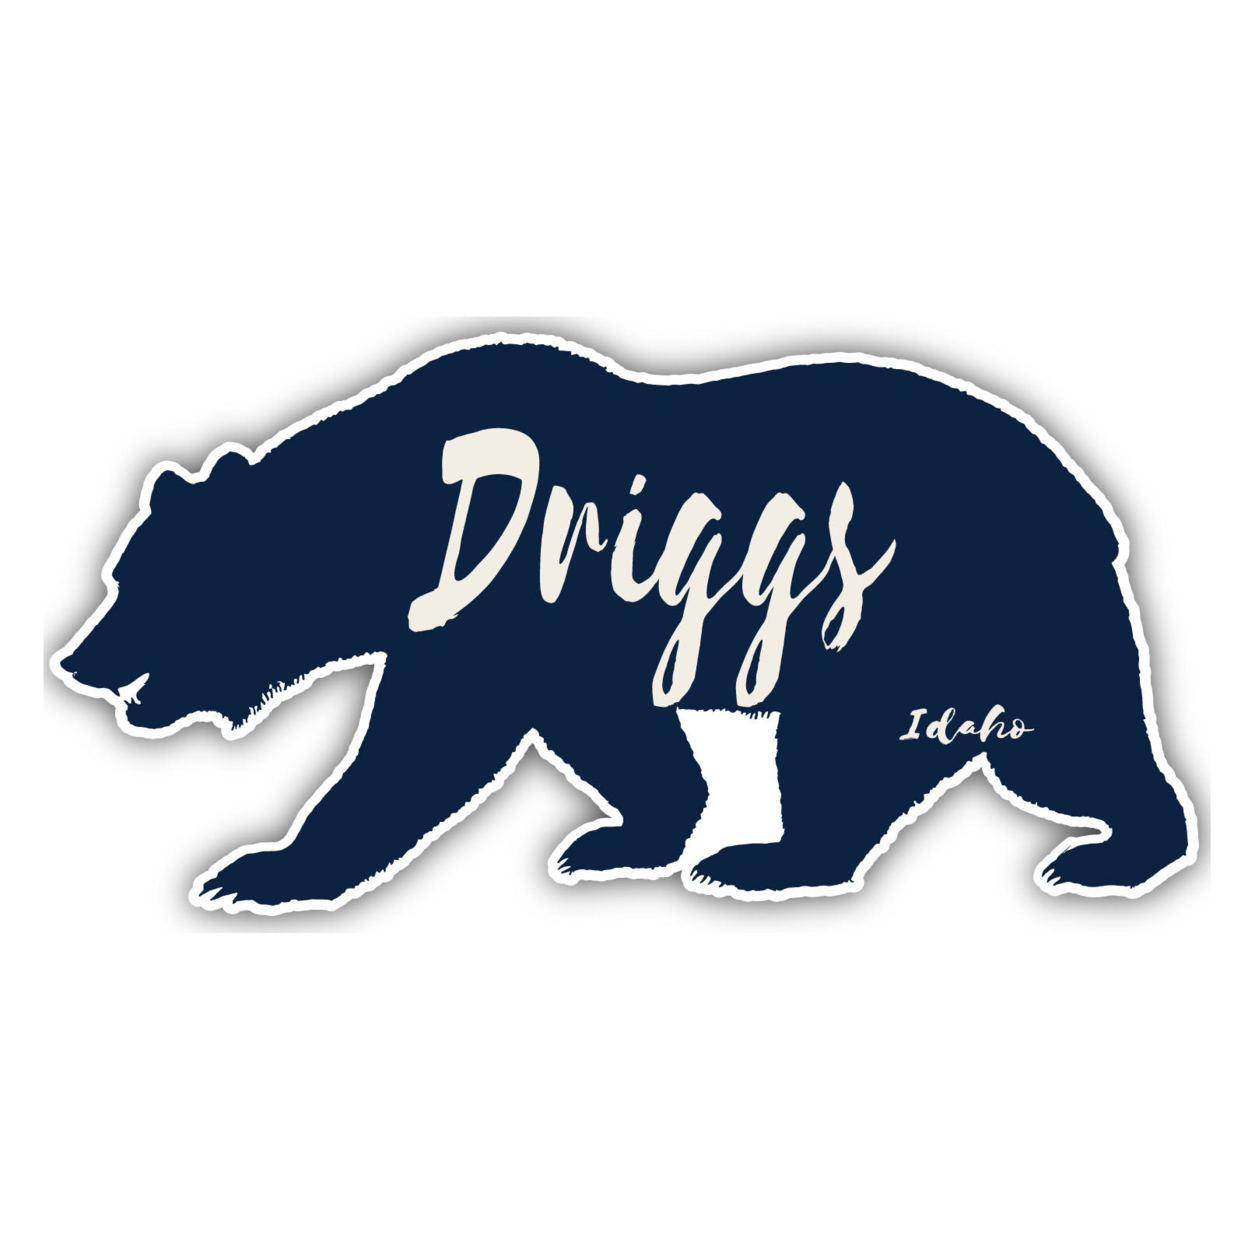 Driggs Idaho Souvenir Decorative Stickers (Choose Theme And Size) - 4-Pack, 8-Inch, Tent